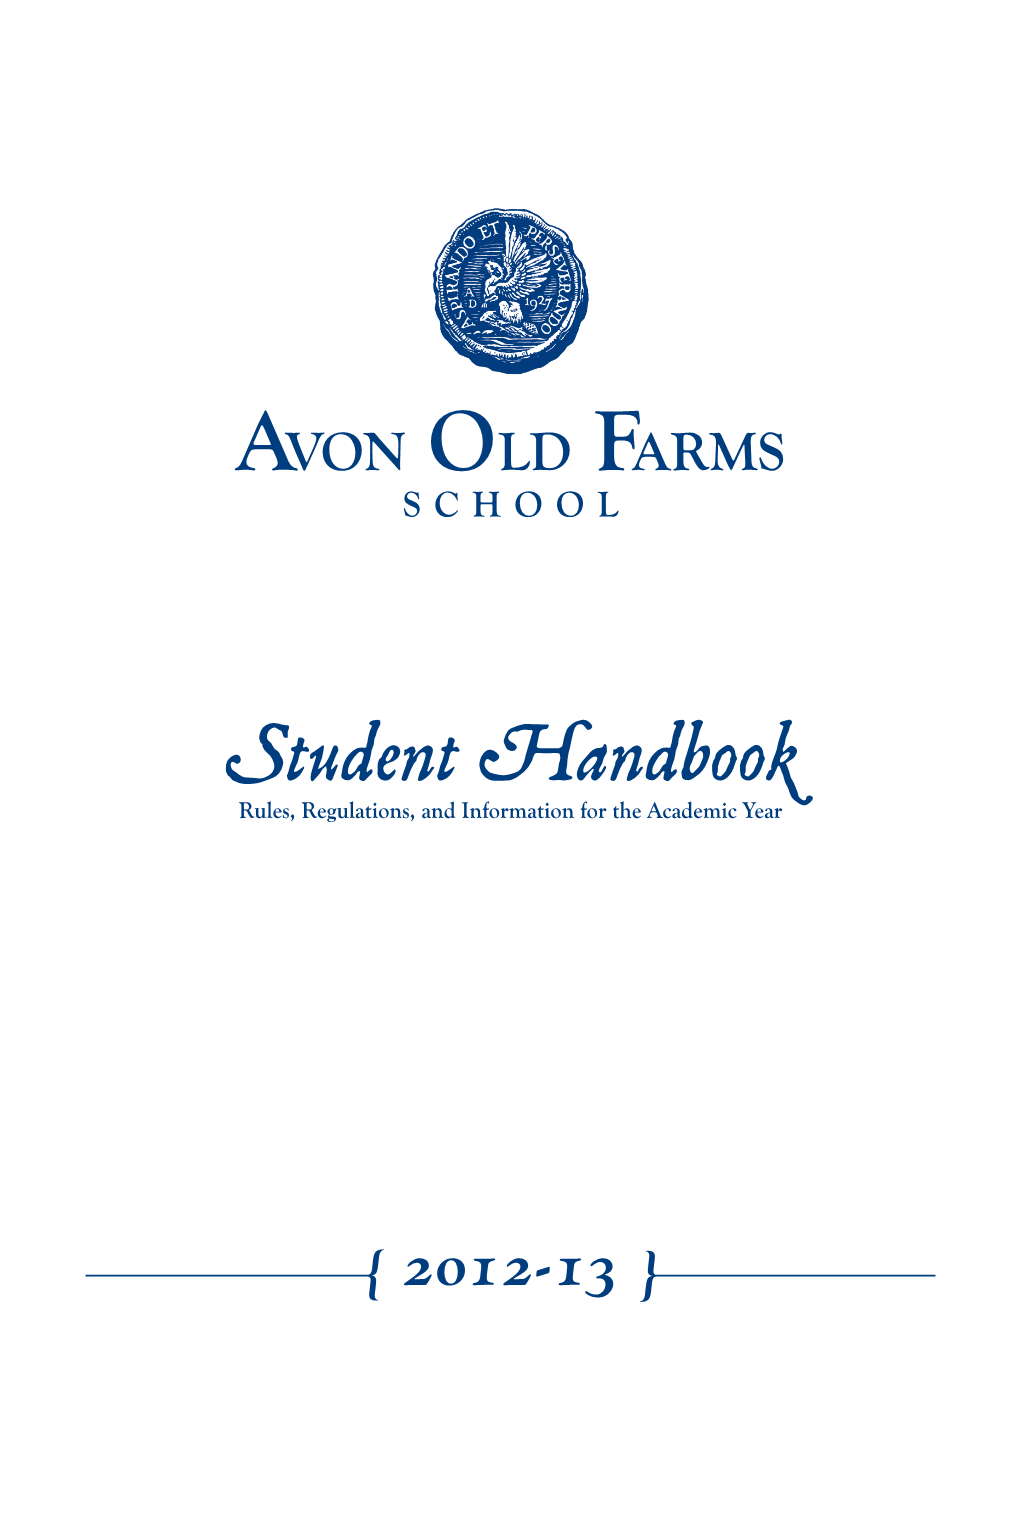 Student Handbook Rules, Regulations, and Information for the Academic Year